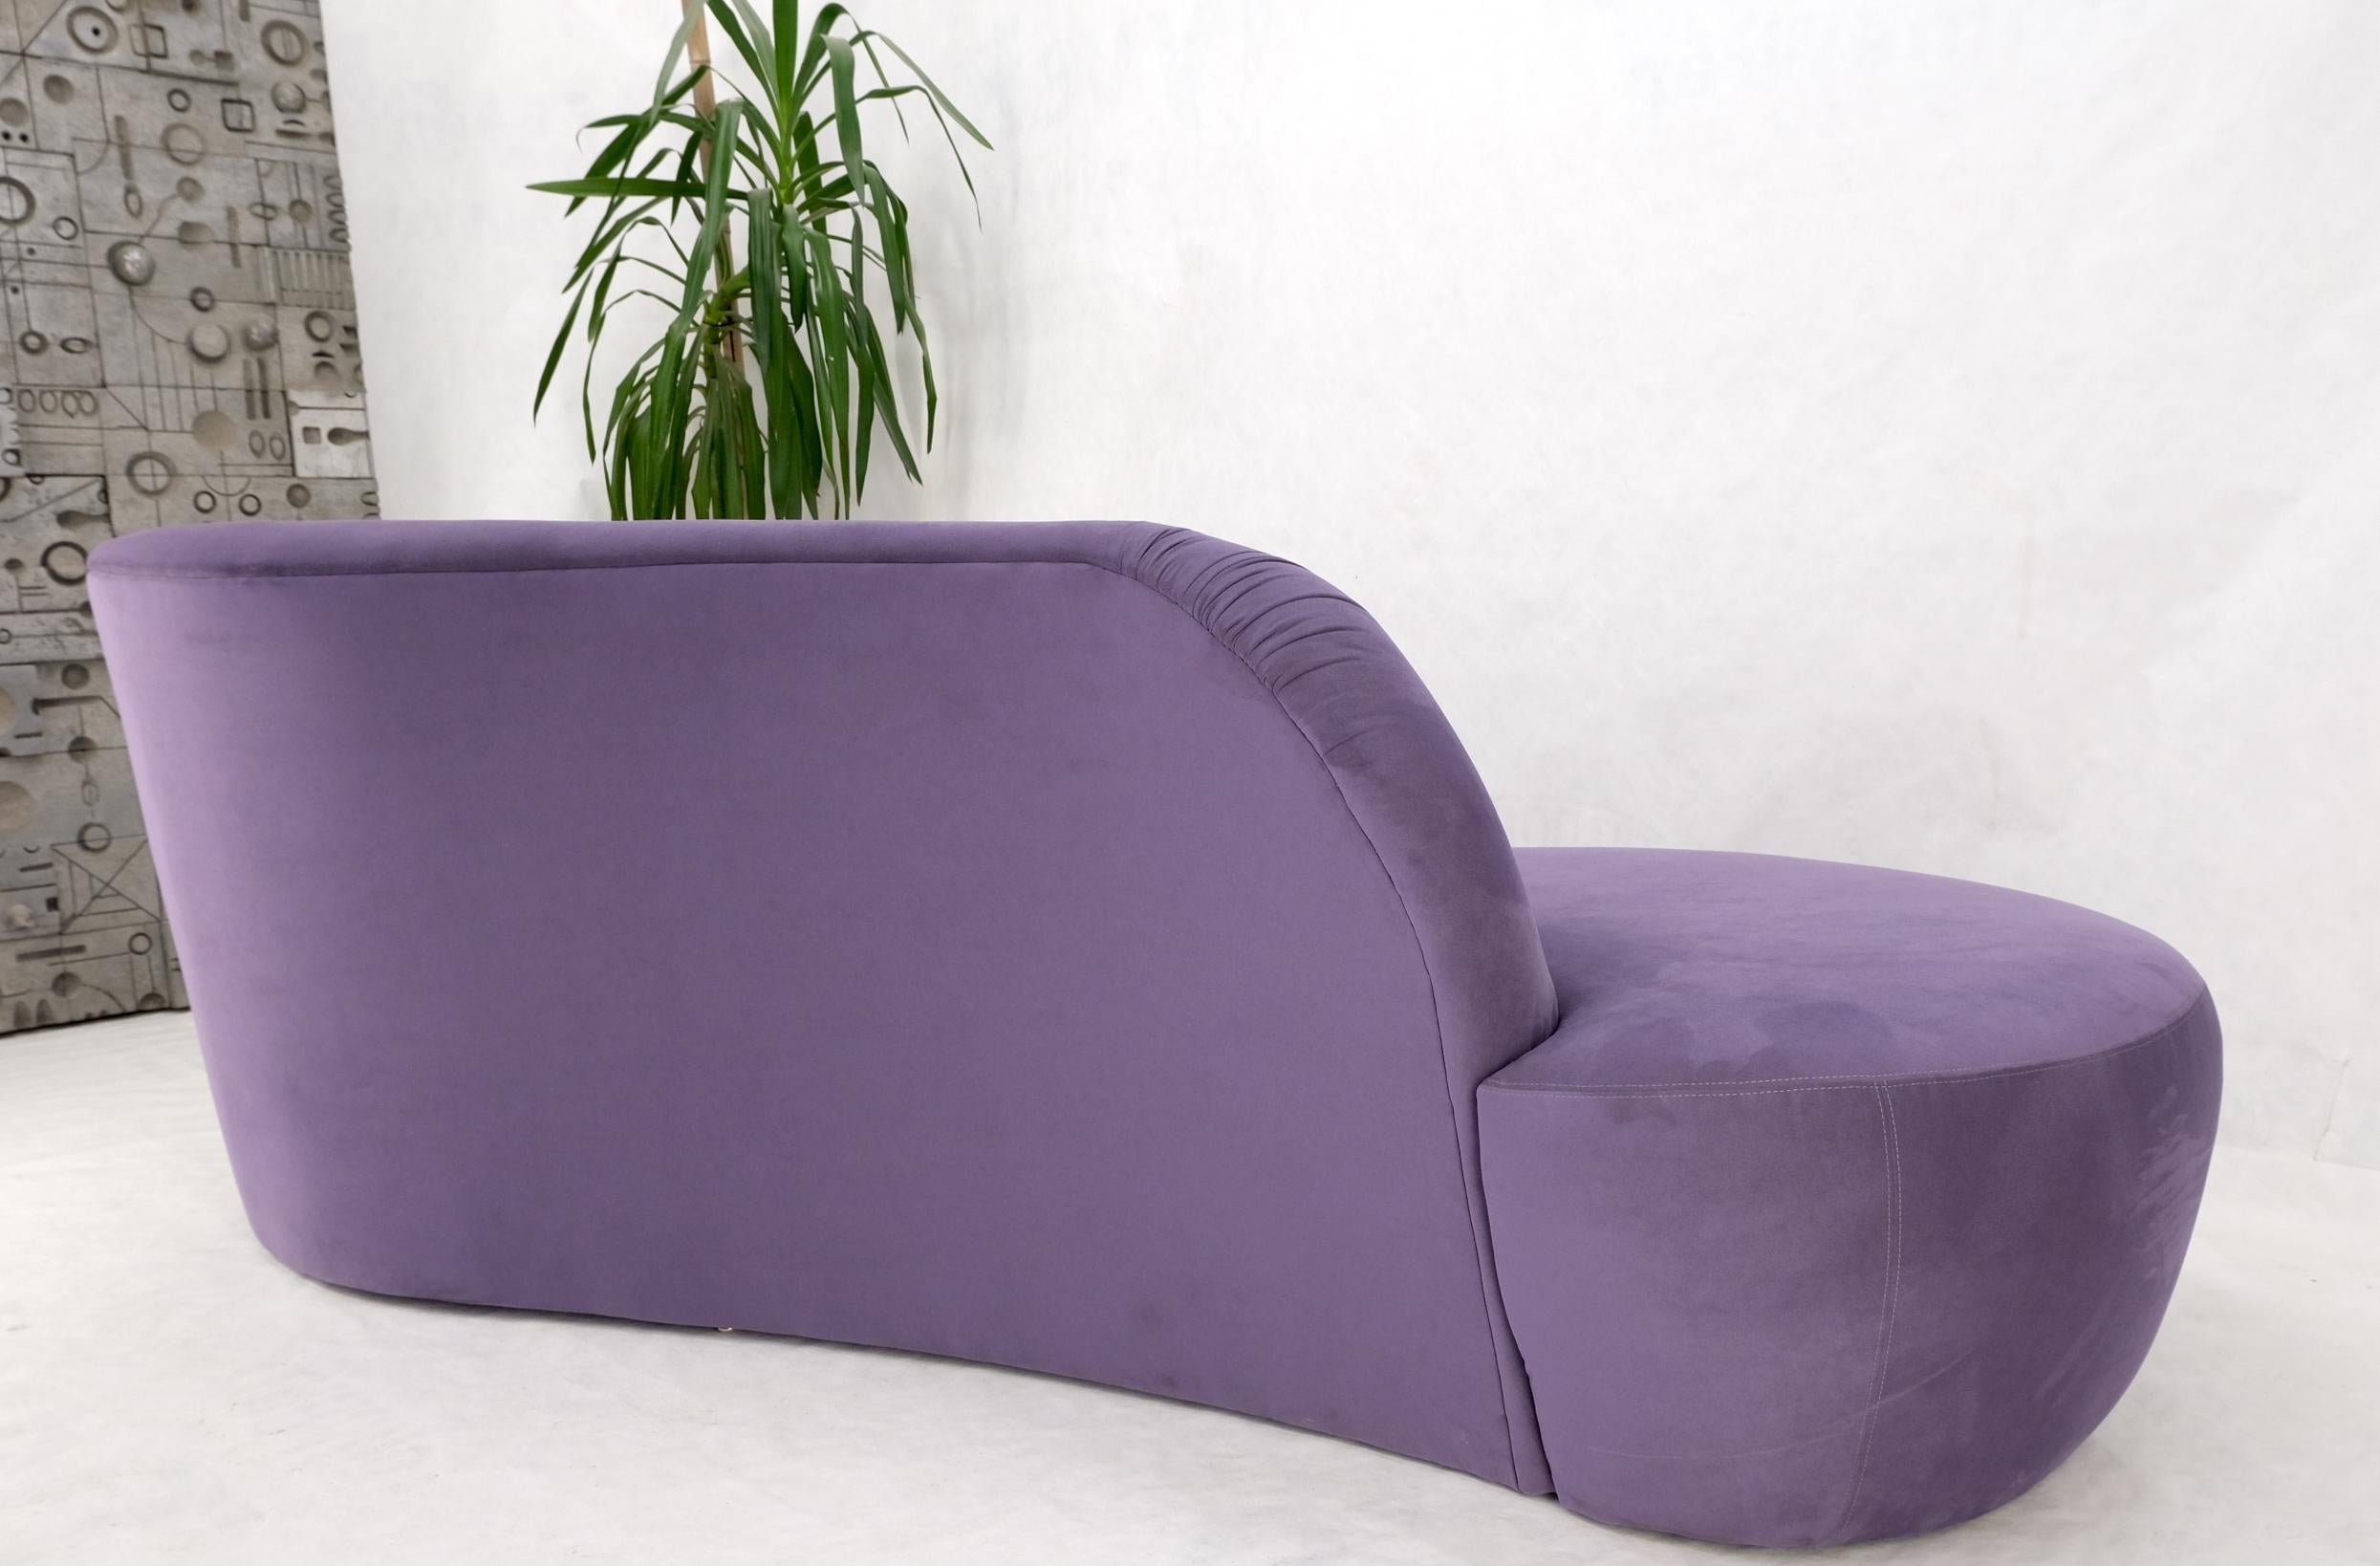 Lavender Ultra Suede Cloud Sofa Chaise Lounge by Weiman Kagan decor.